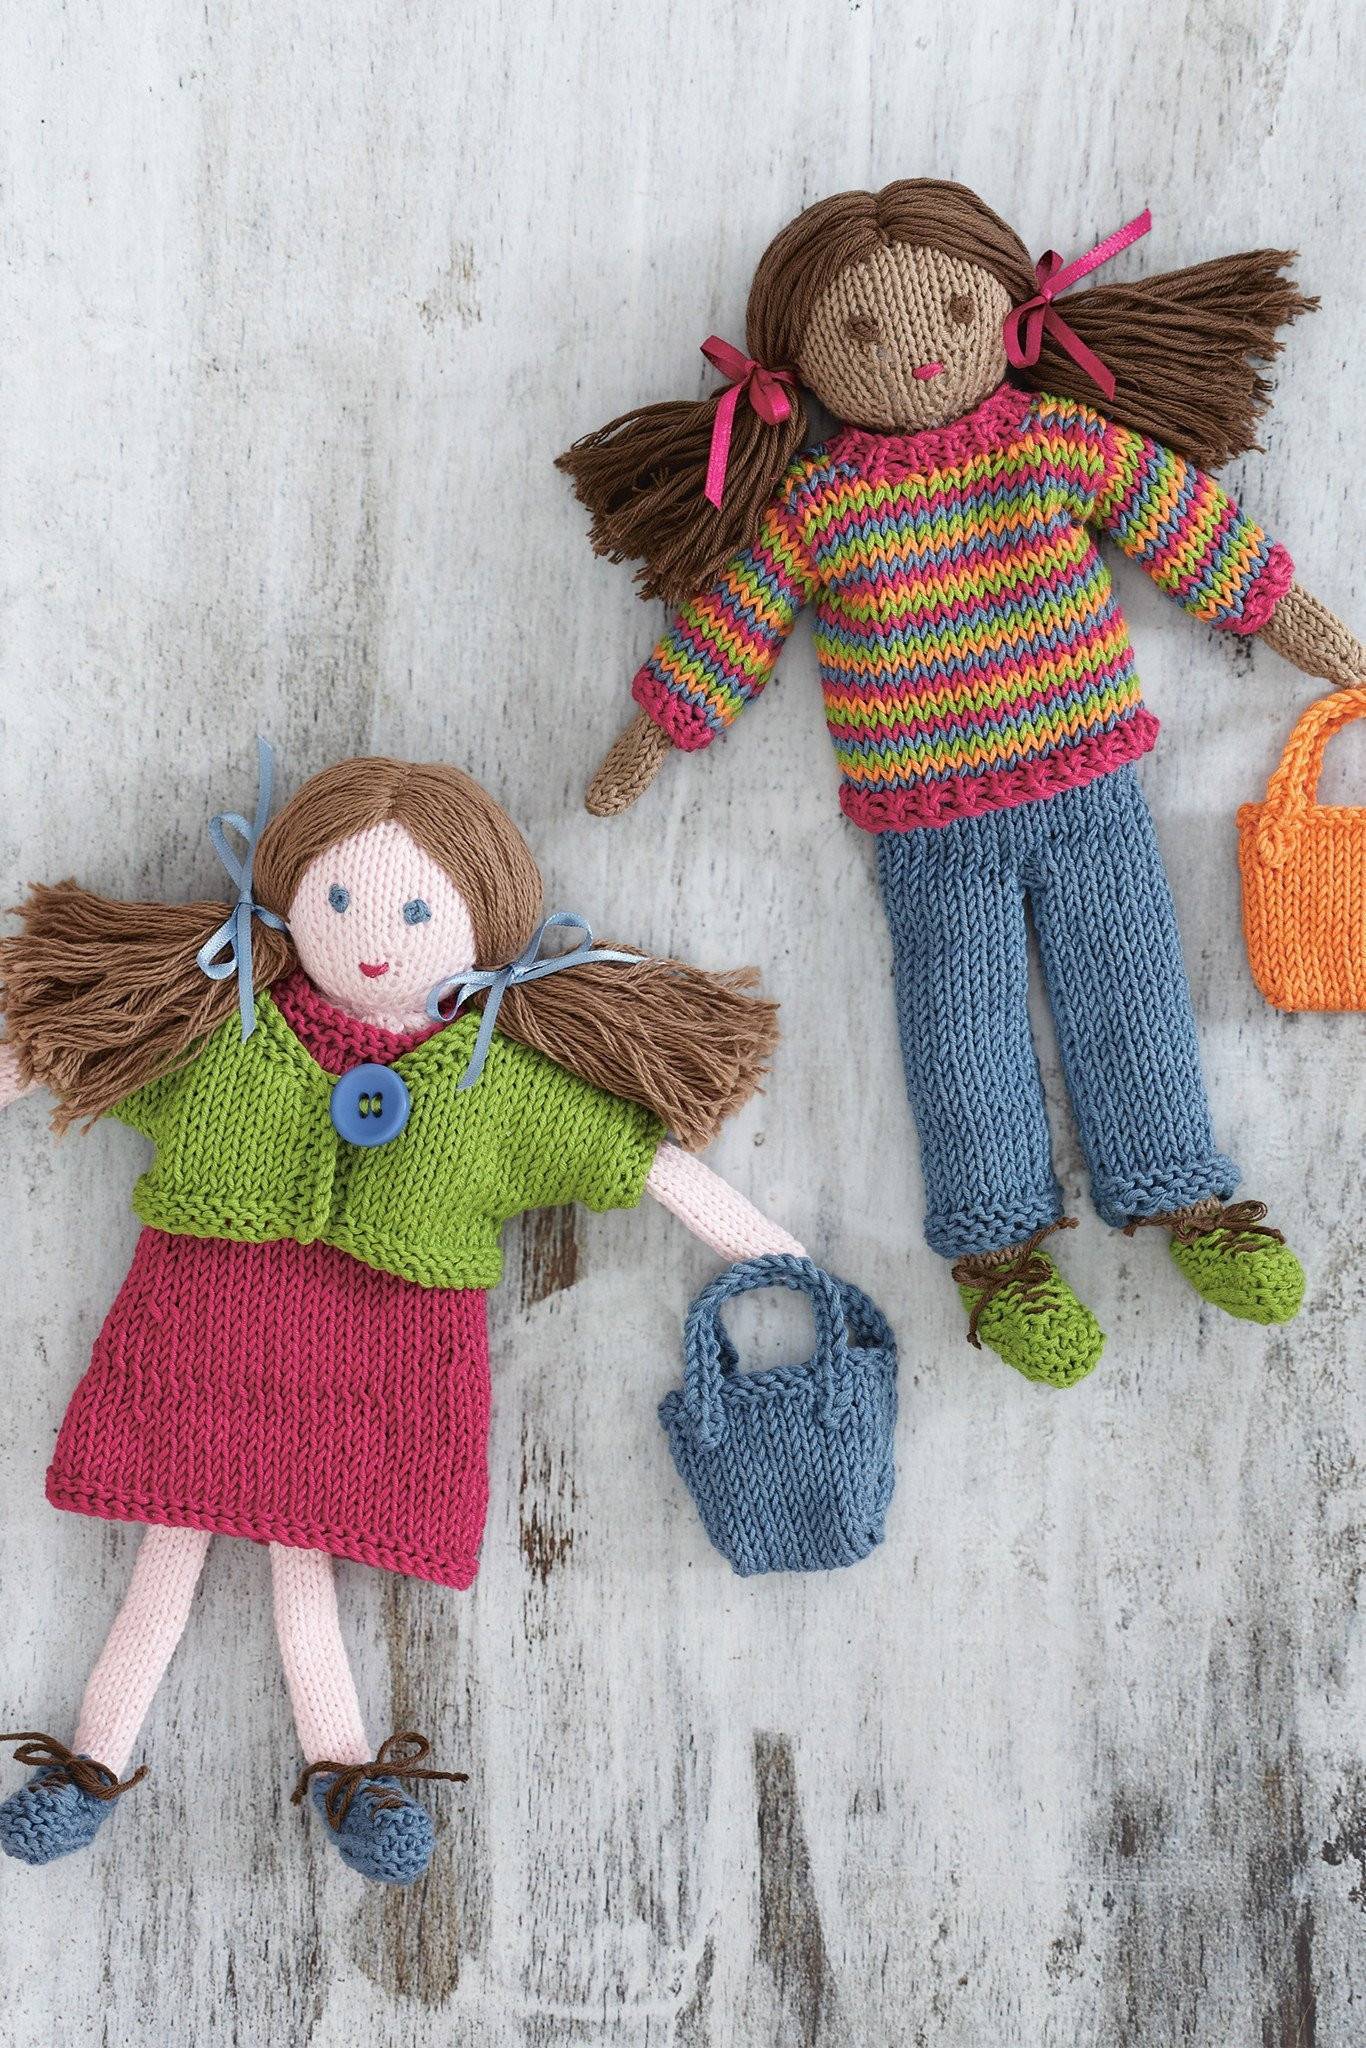 Doll And Outfit Set Knitting Pattern The Knitting Network